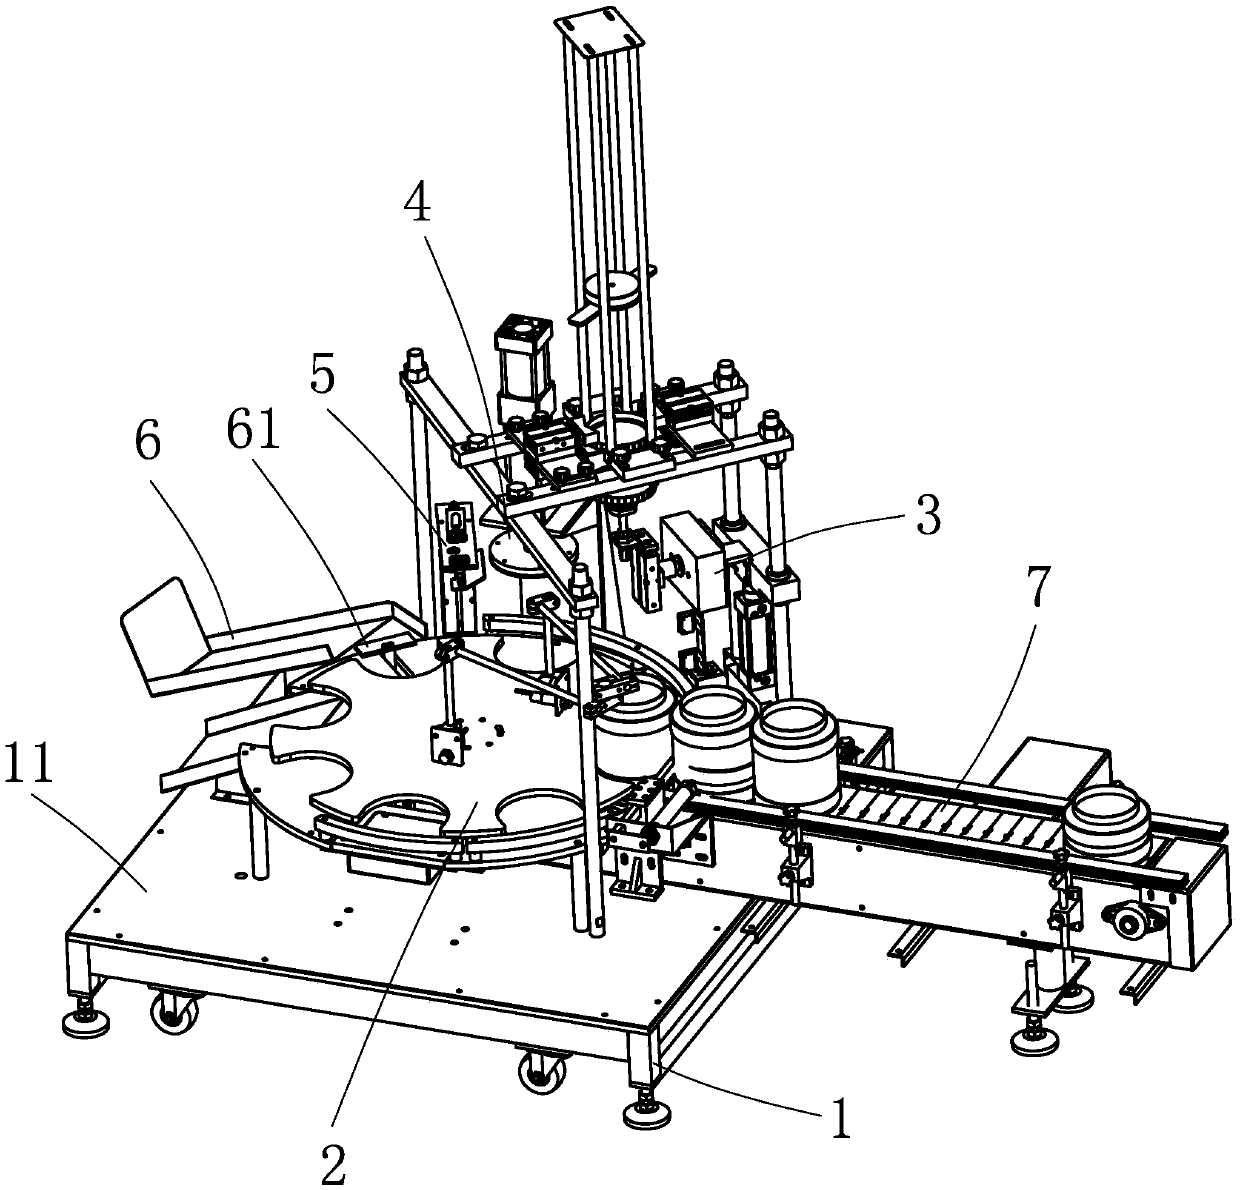 Automatic cover pressing/screwing machine capable of conducting self-adaption on high bottles and low bottles